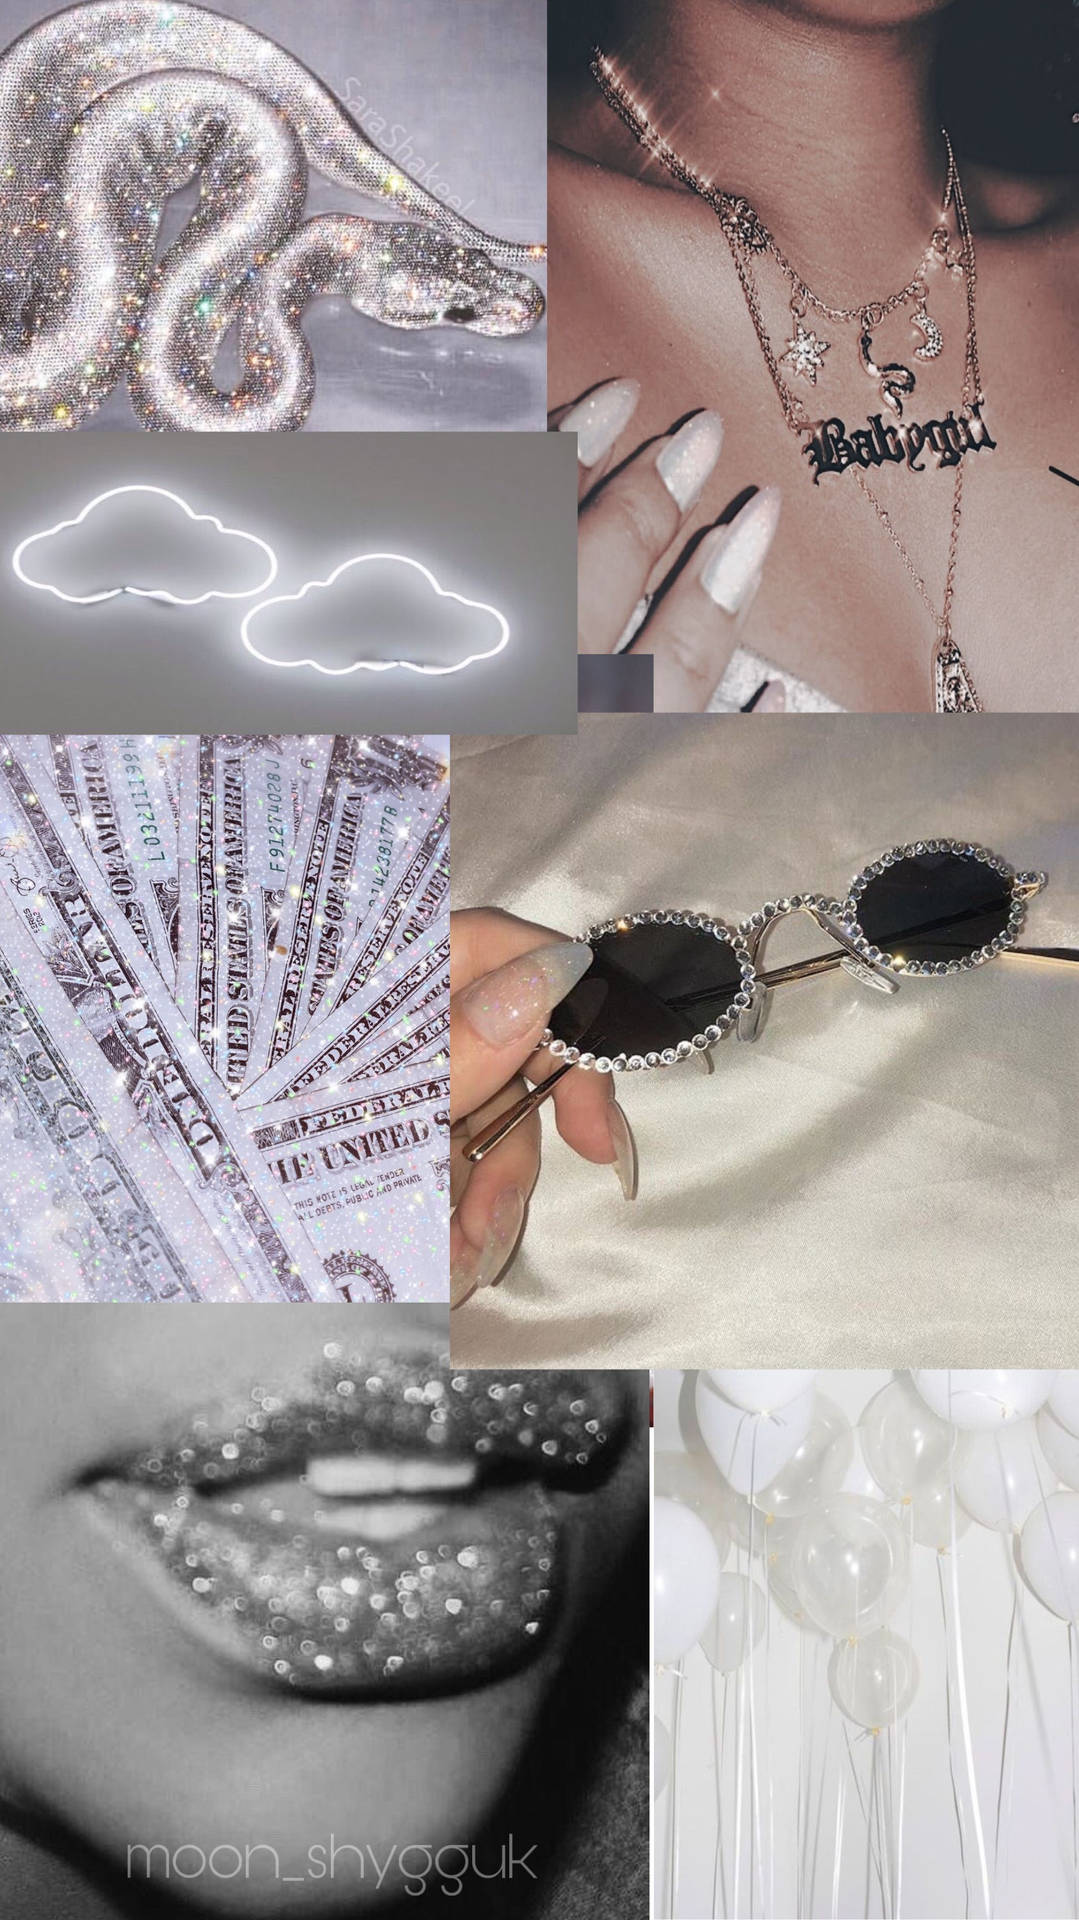 Collage Baddie Aesthetic In White Background